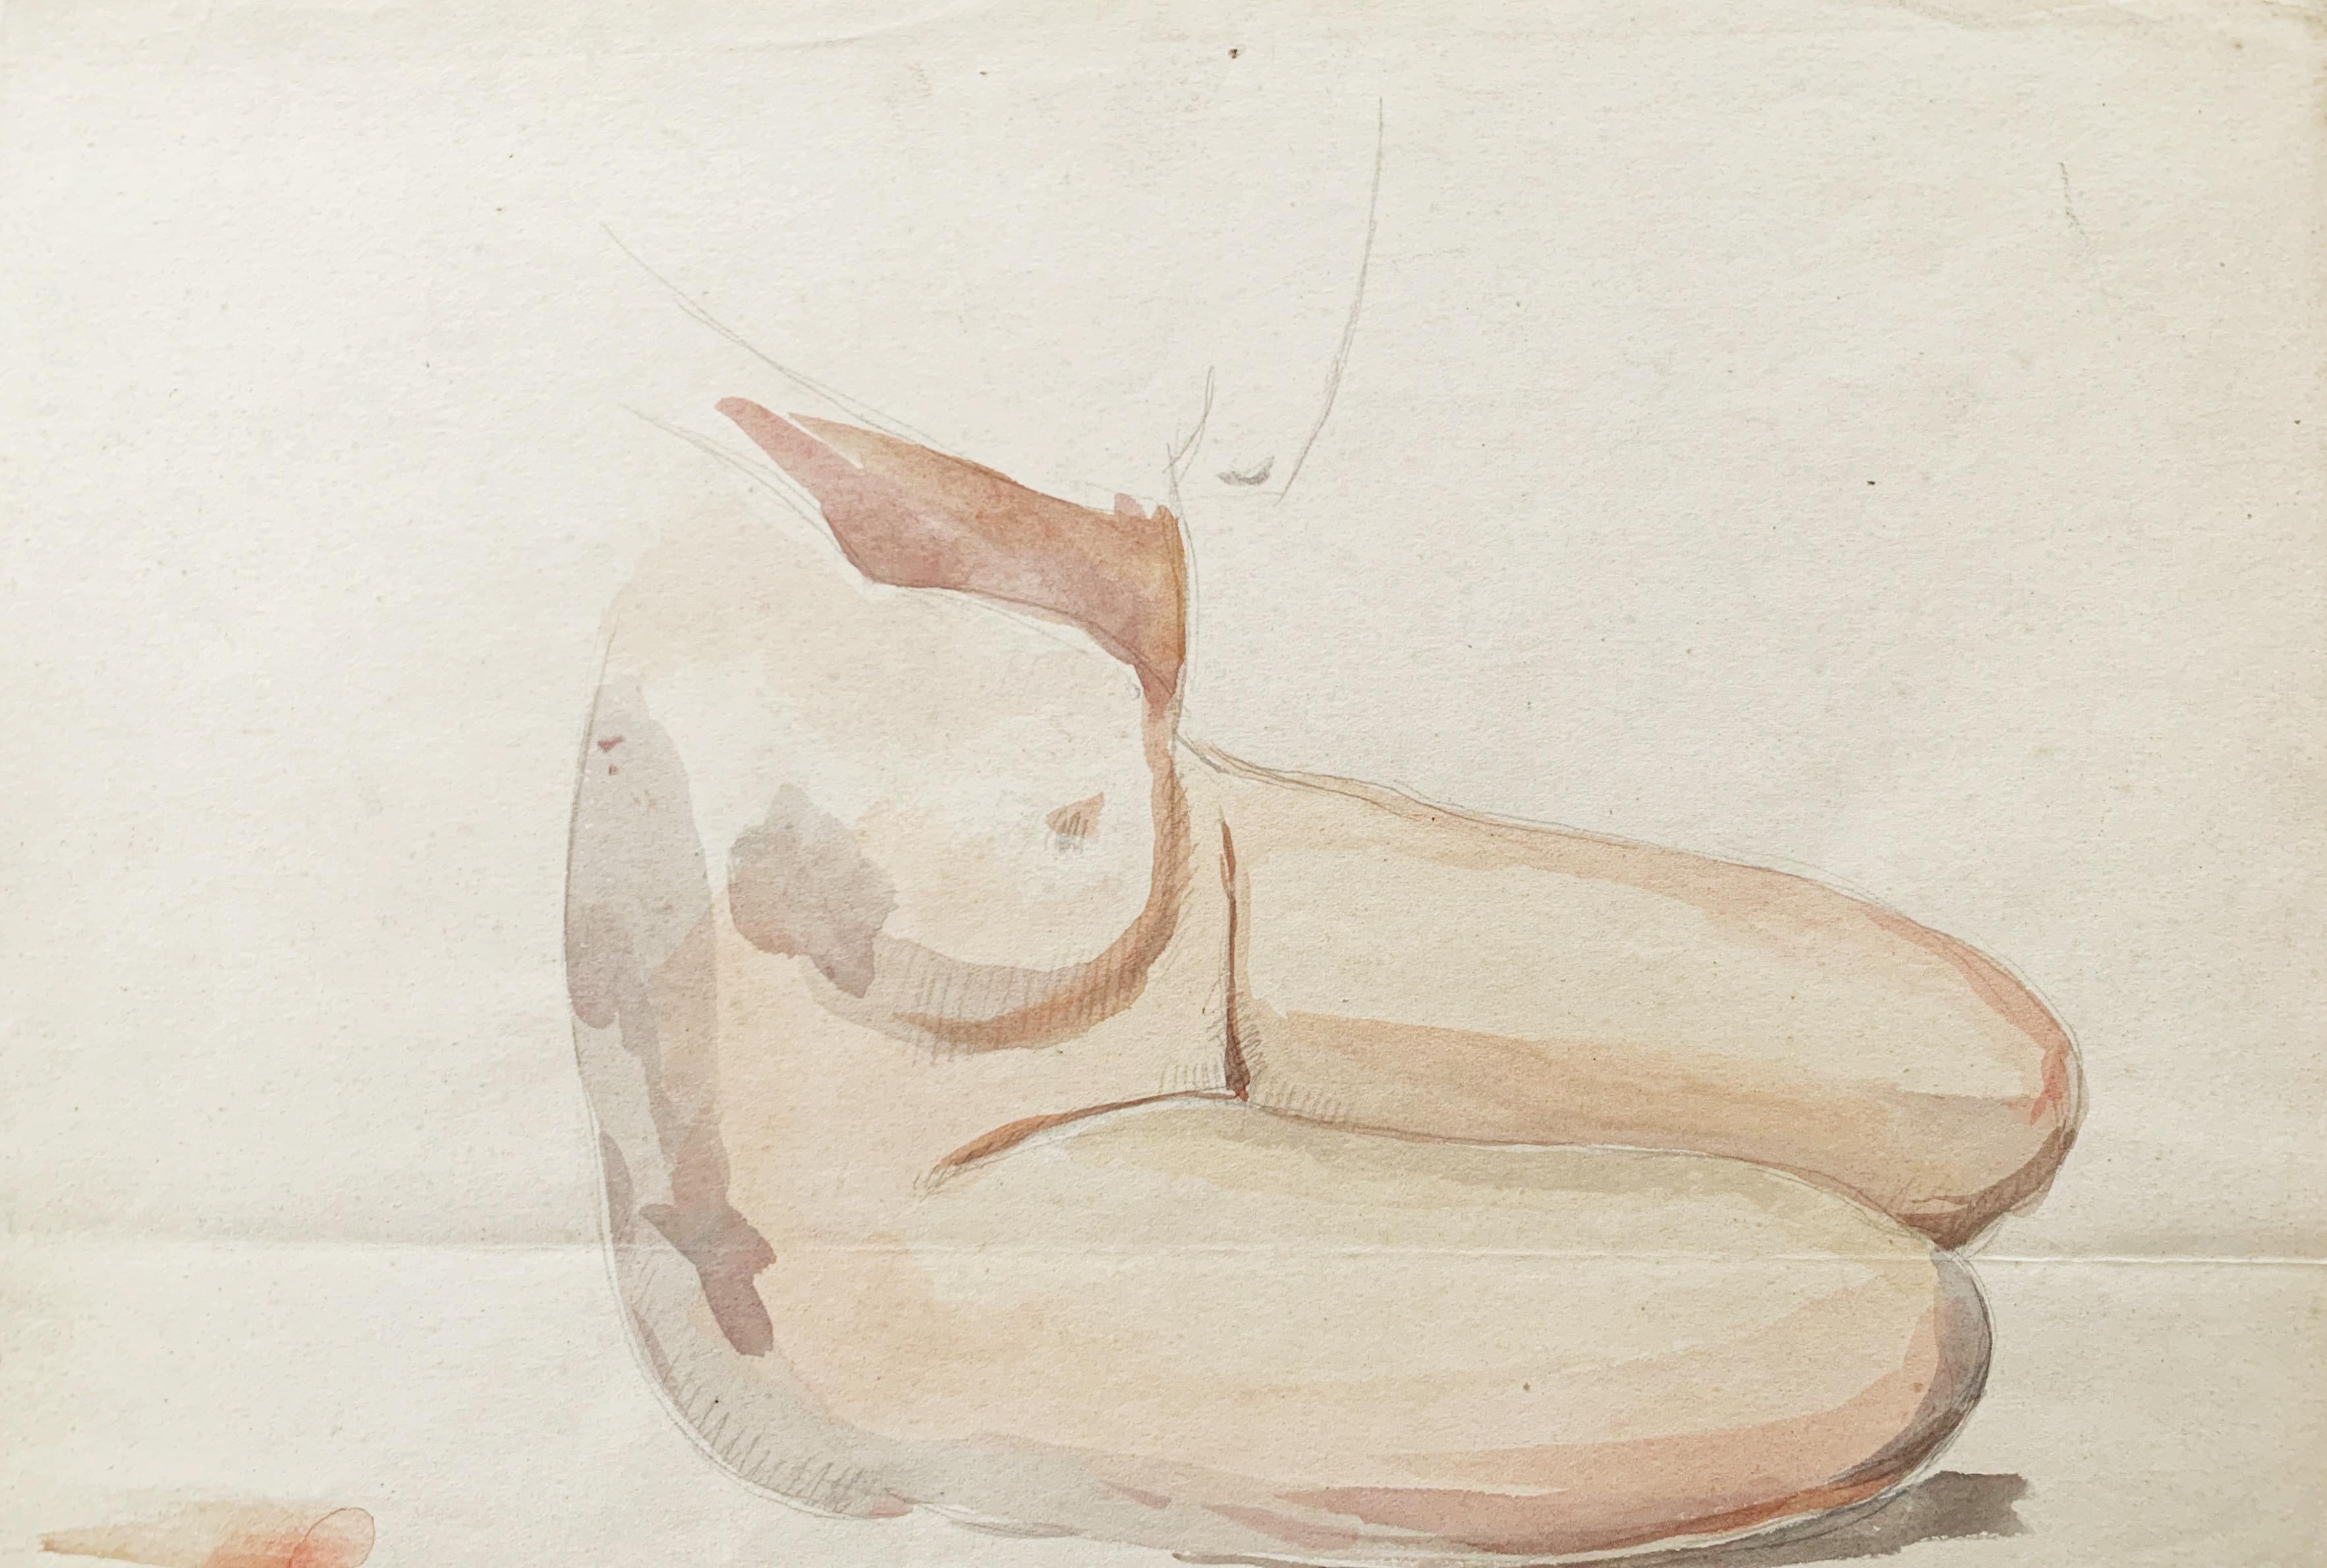 Raphaël Delorme (1885-1962), Study of a female nude, watercolor and pencil 